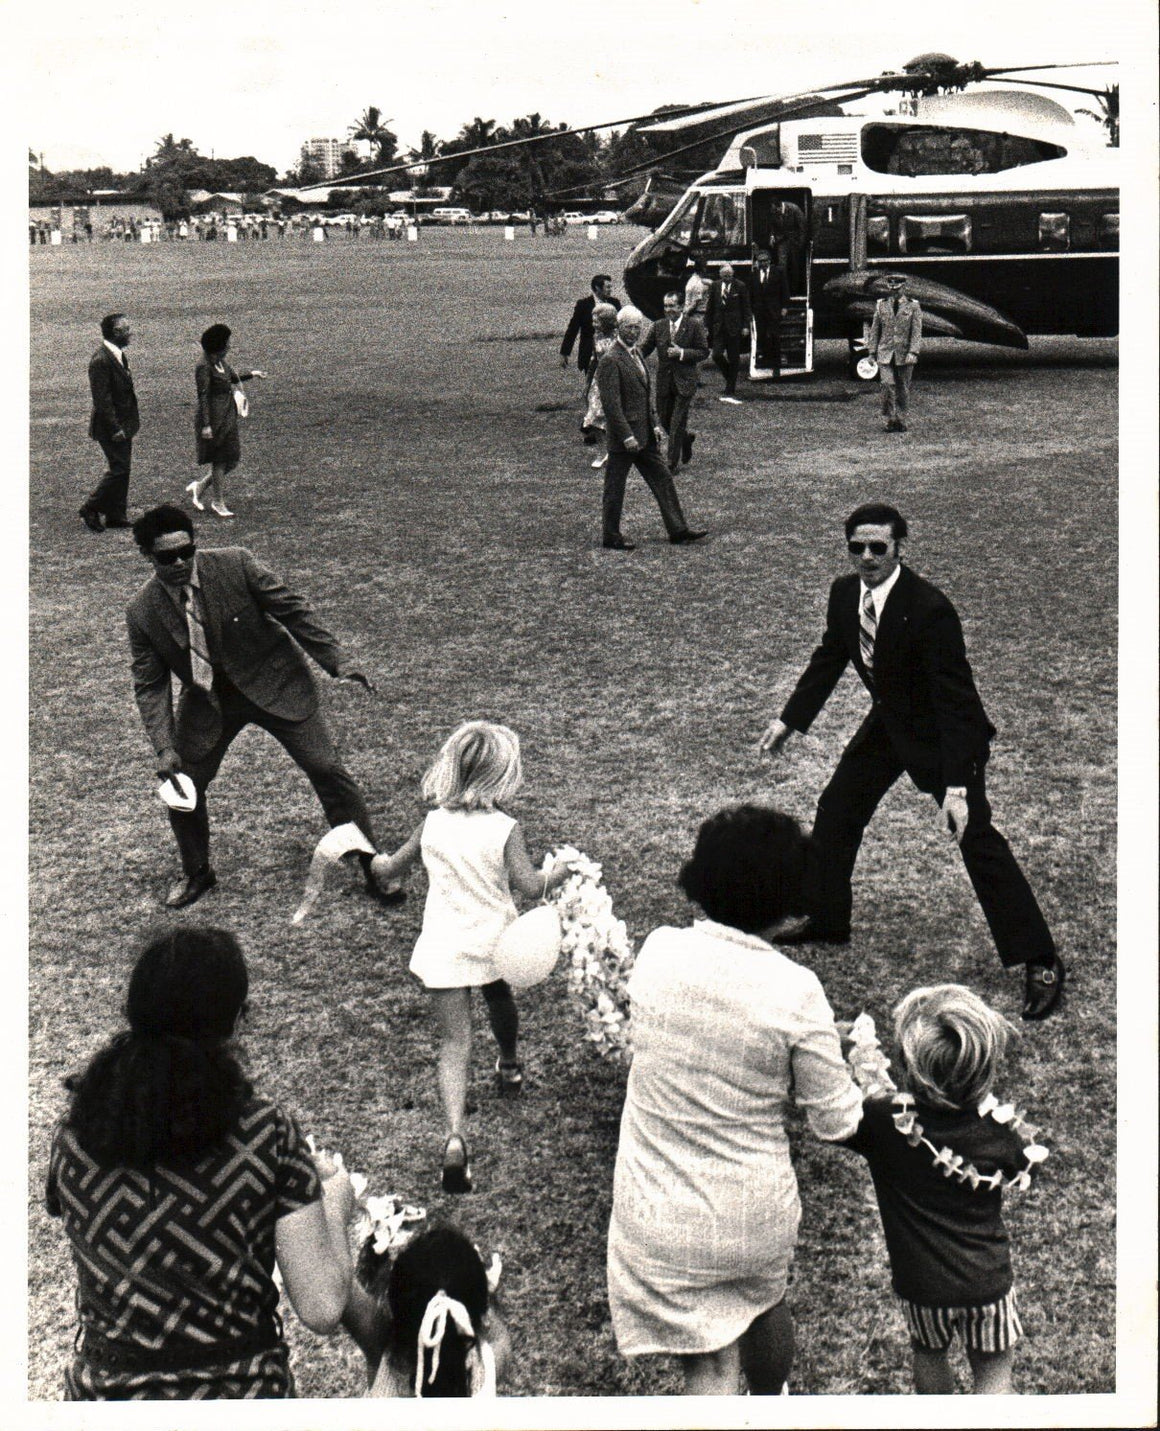 Bob Young Pulitzer Prize Photo of Nixon Young Girl Running and Secret Service